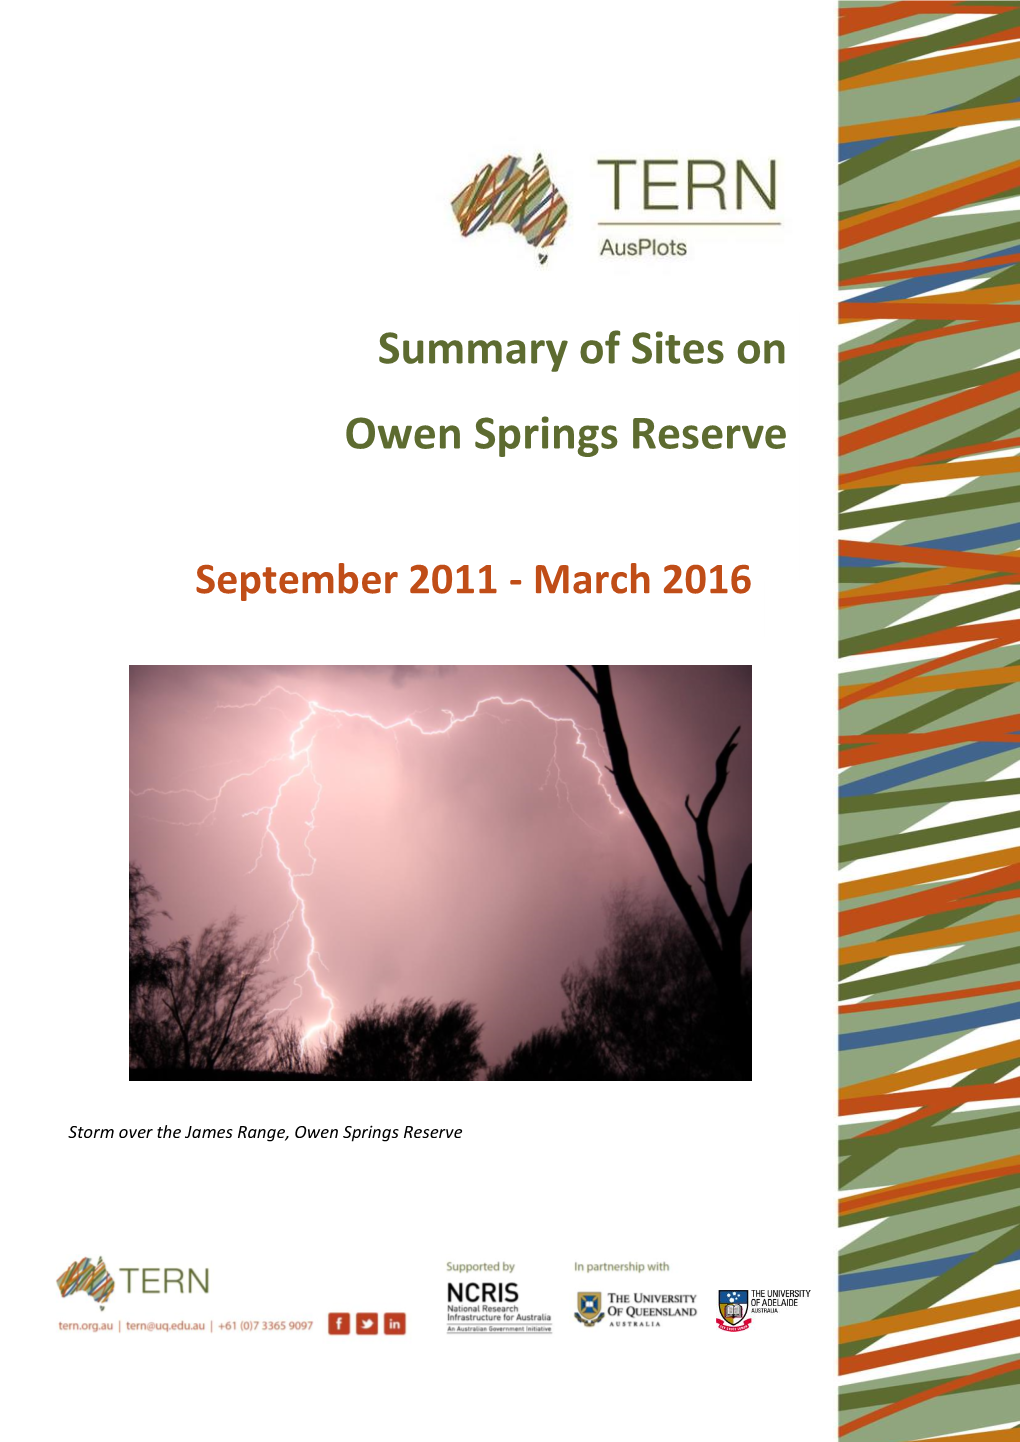 Summary of Sites on Owen Springs Reserve